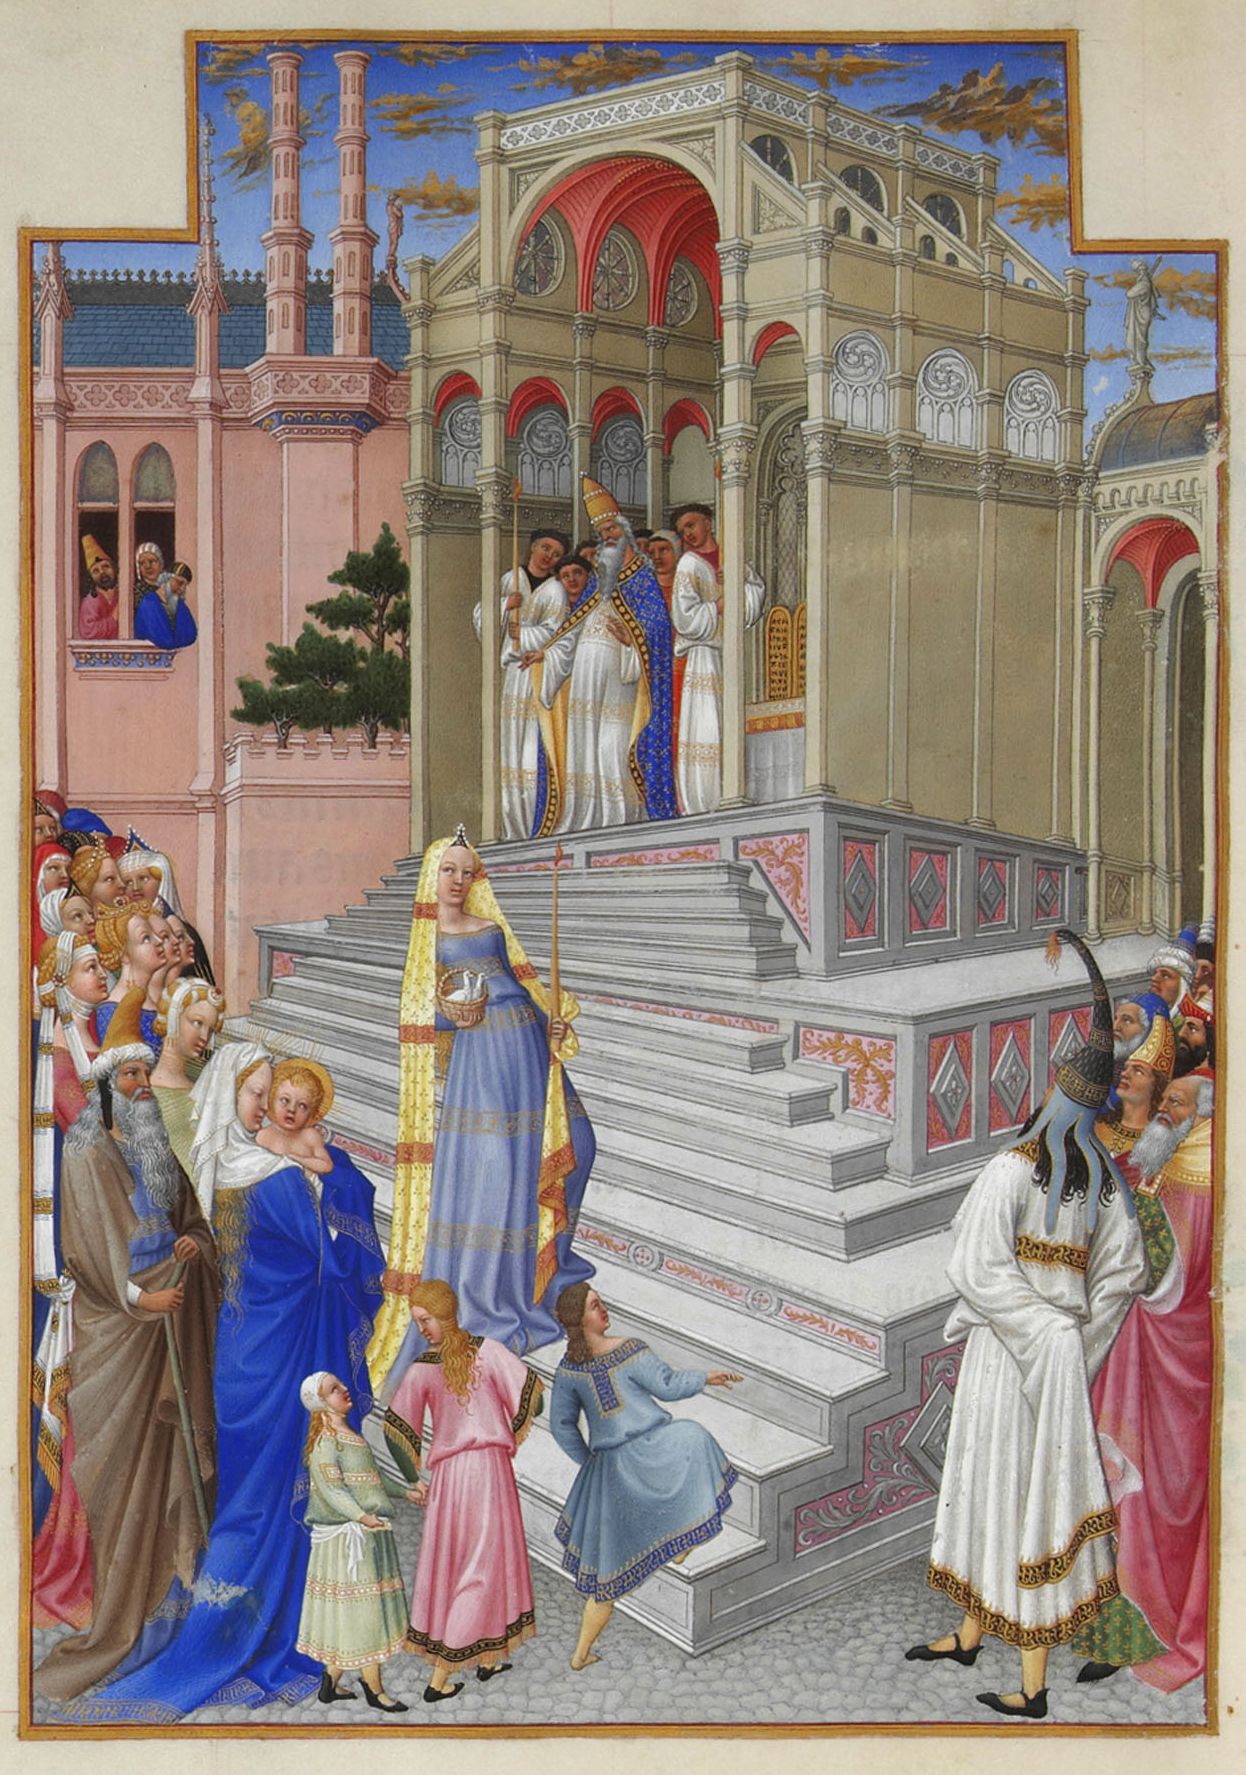 Folio 54, "The Purification of the Virgin" from the Très Riches Heures du duc de Berry